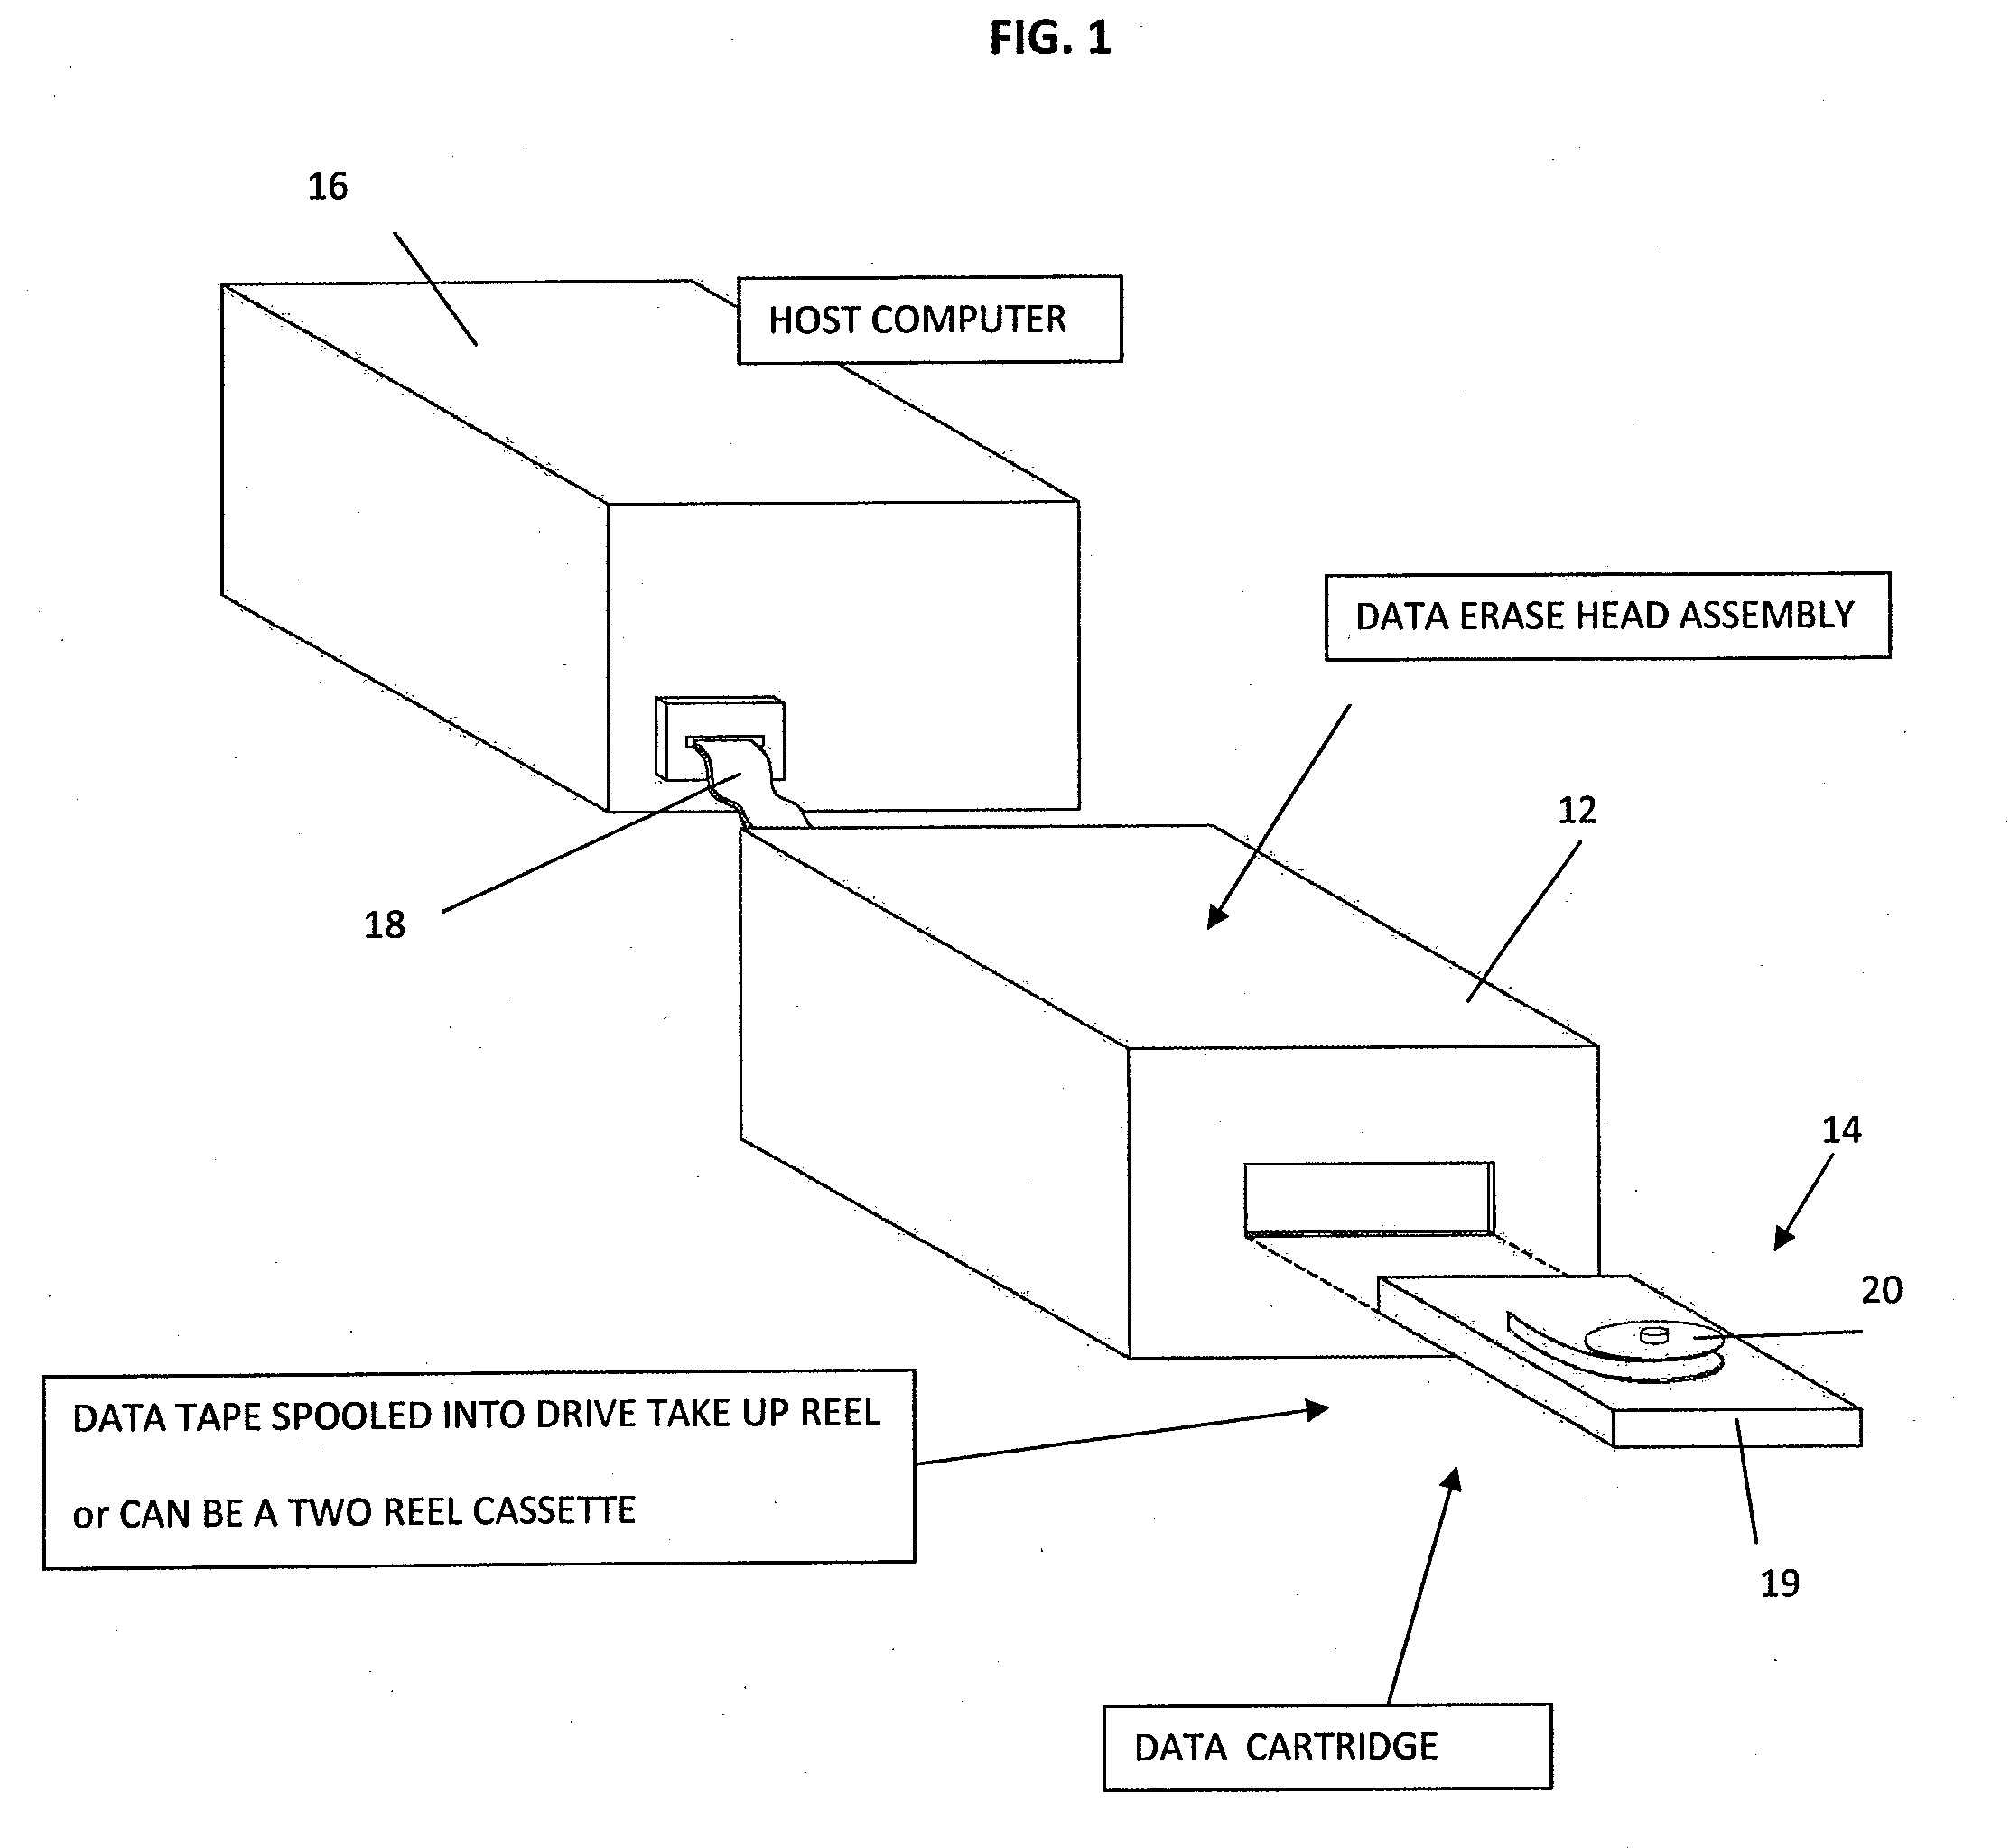 Erase drive system and methods of erasure for tape data cartridge